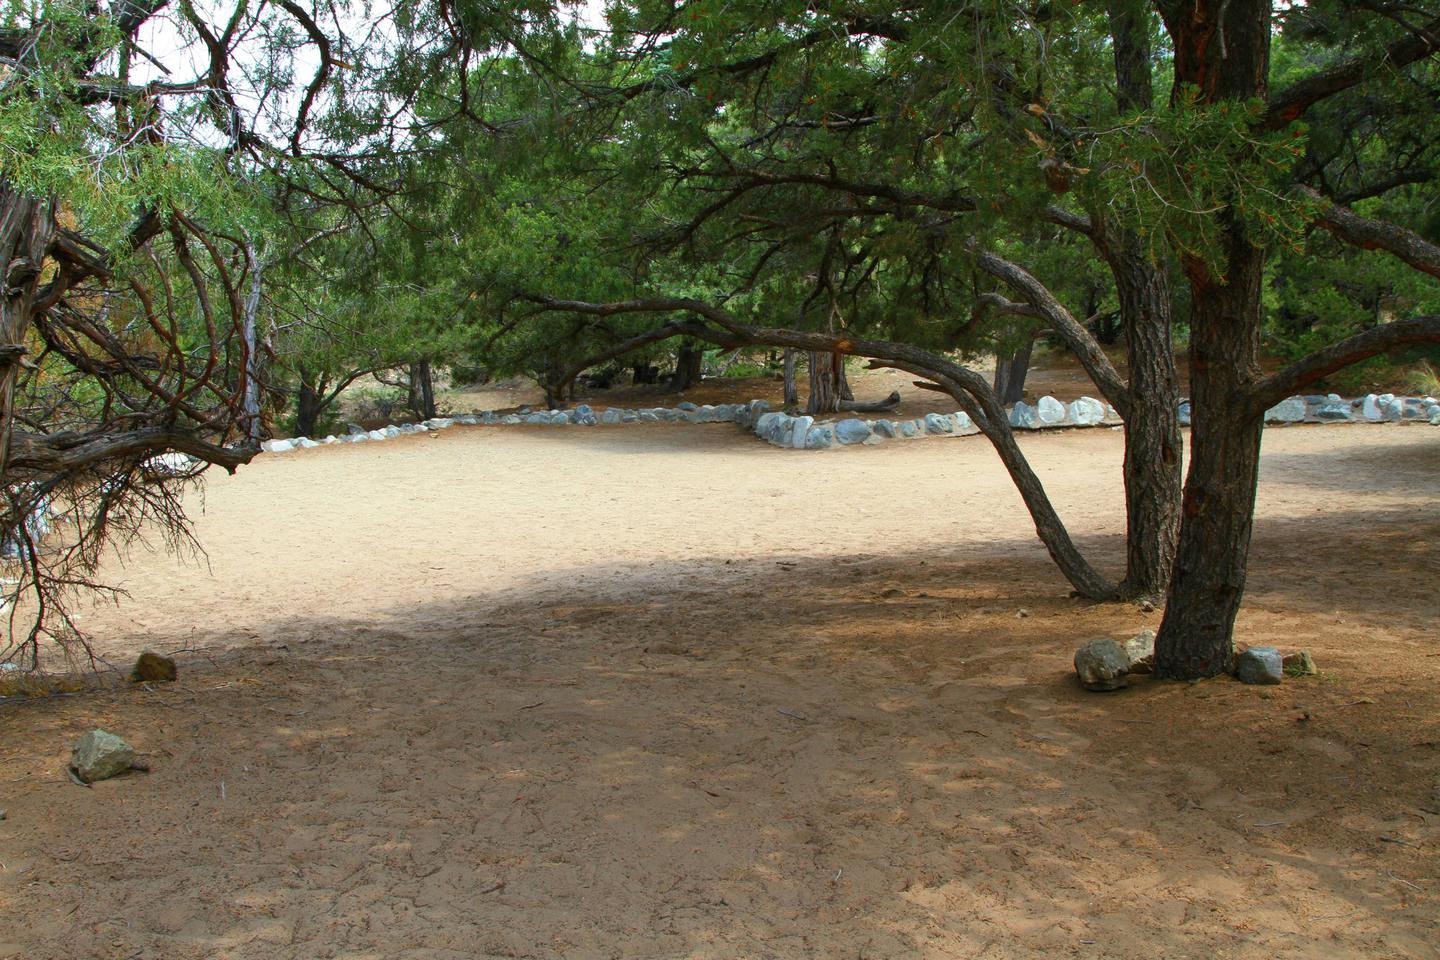 Another view Group Site "A" tent area. The tent area does have a low rock wall showing the boundary of the tent area.Group Site A, Pinon Flats Campground